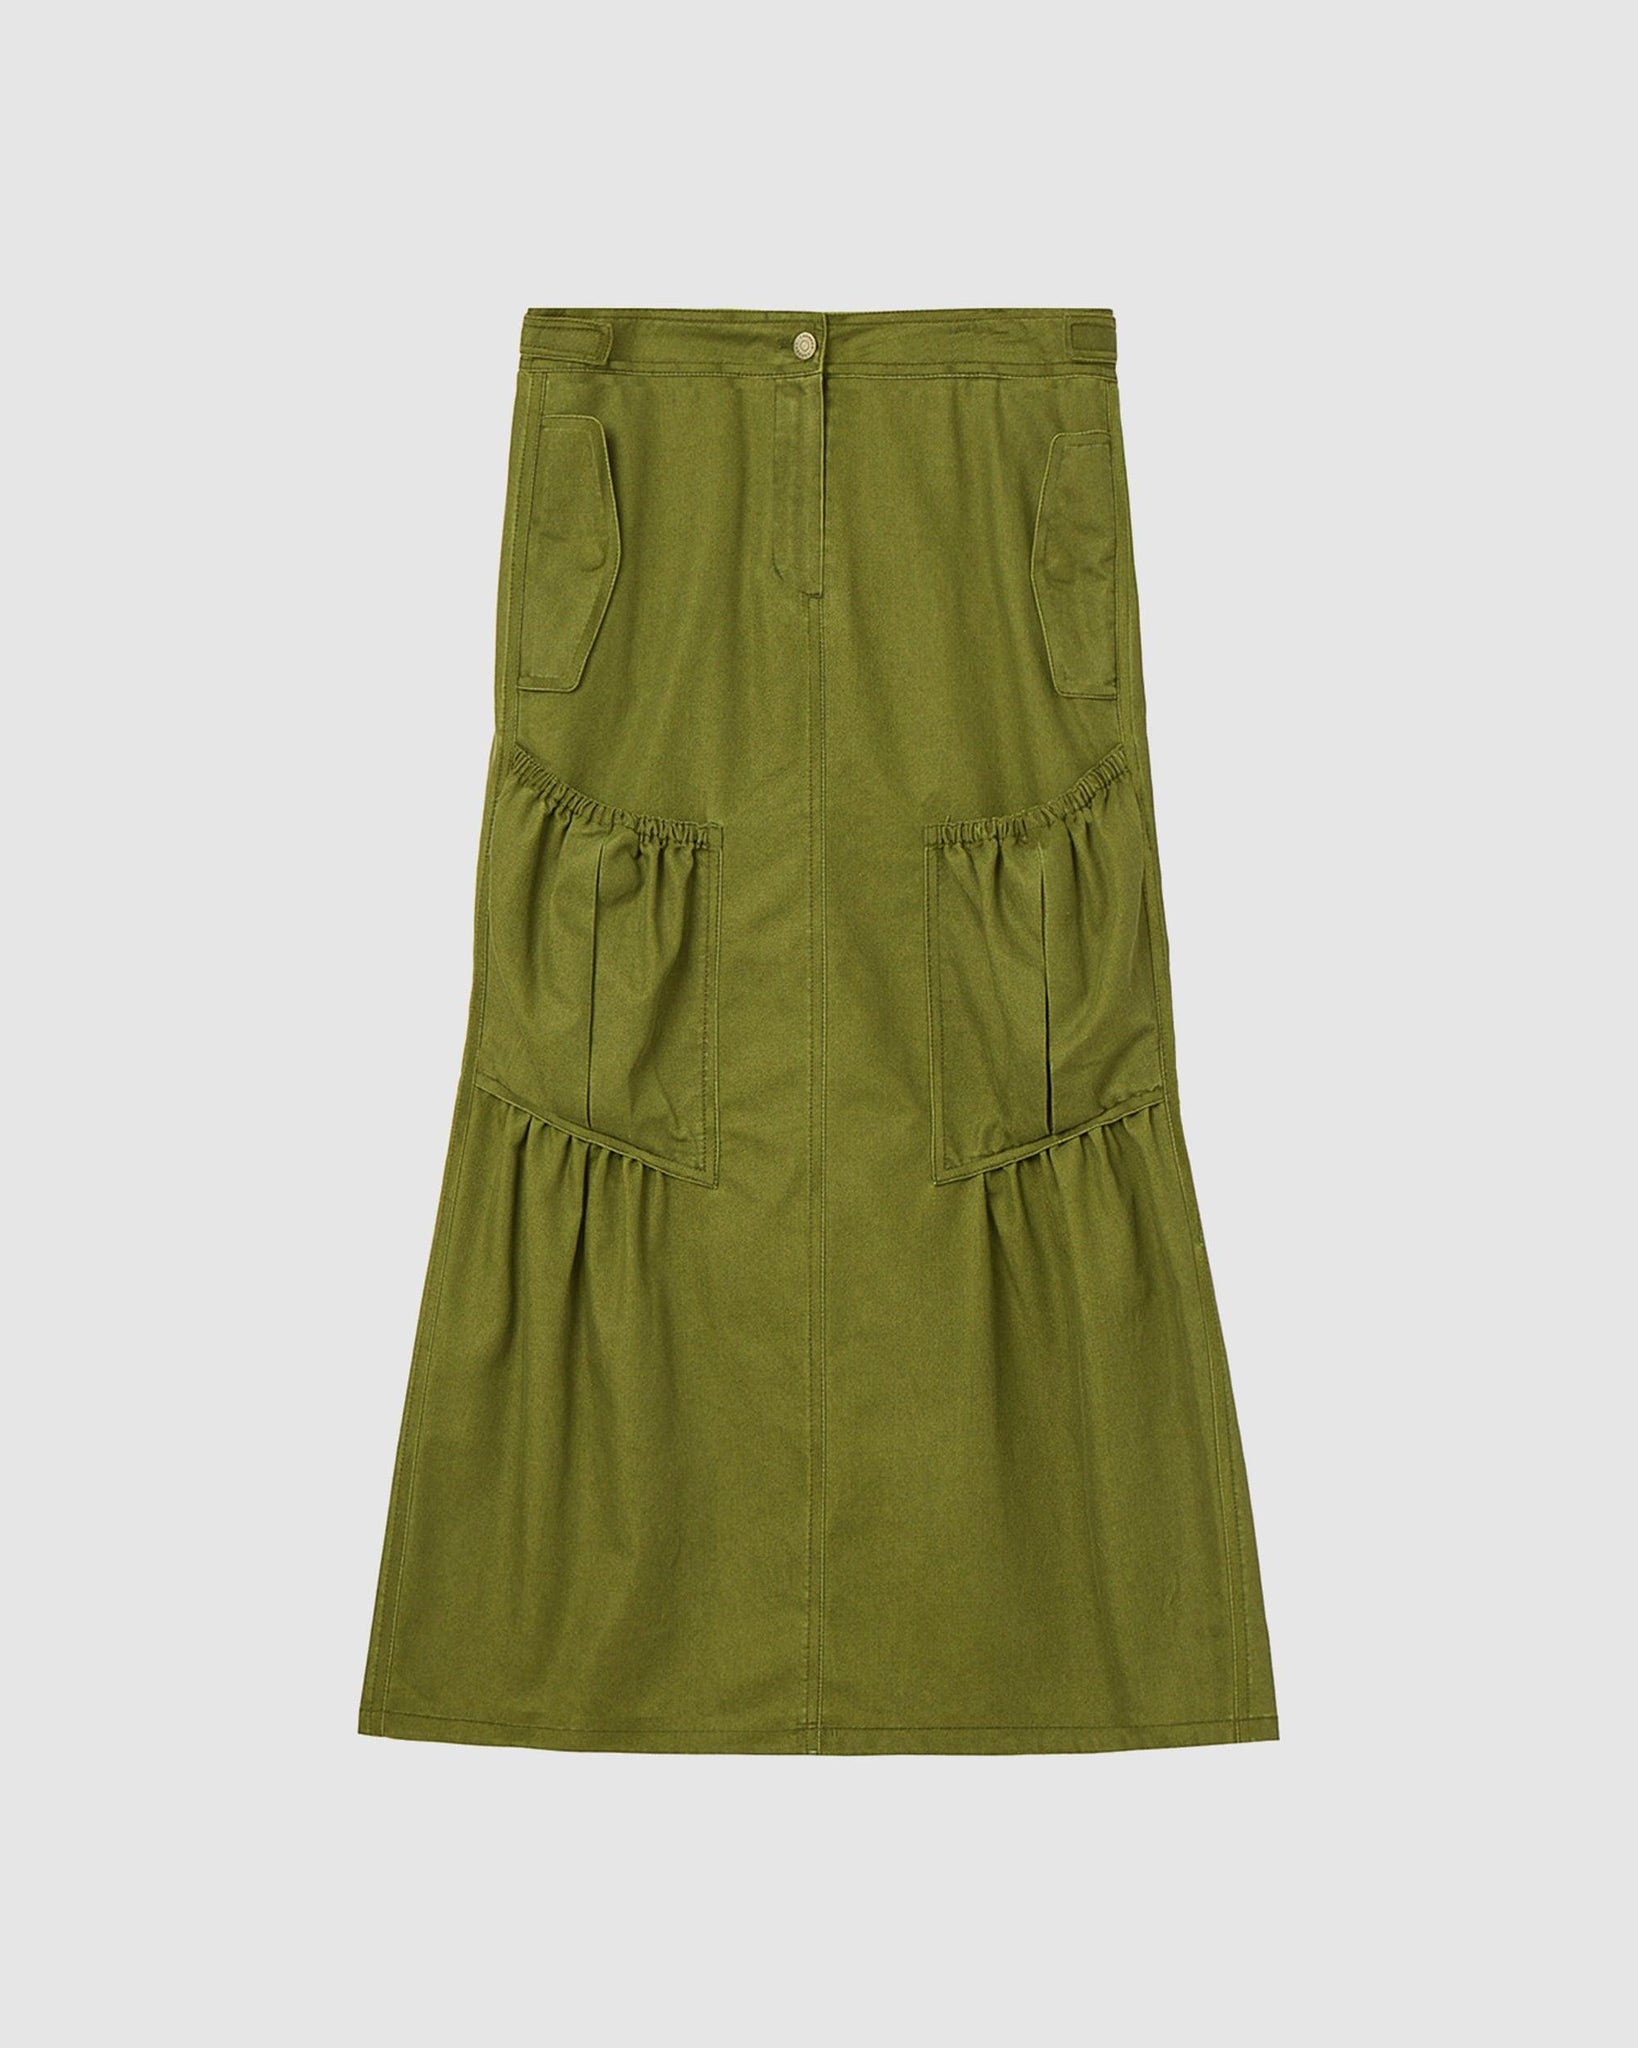 Shirring Work Skirt - {{ collection.title }} - Chinatown Country Club 